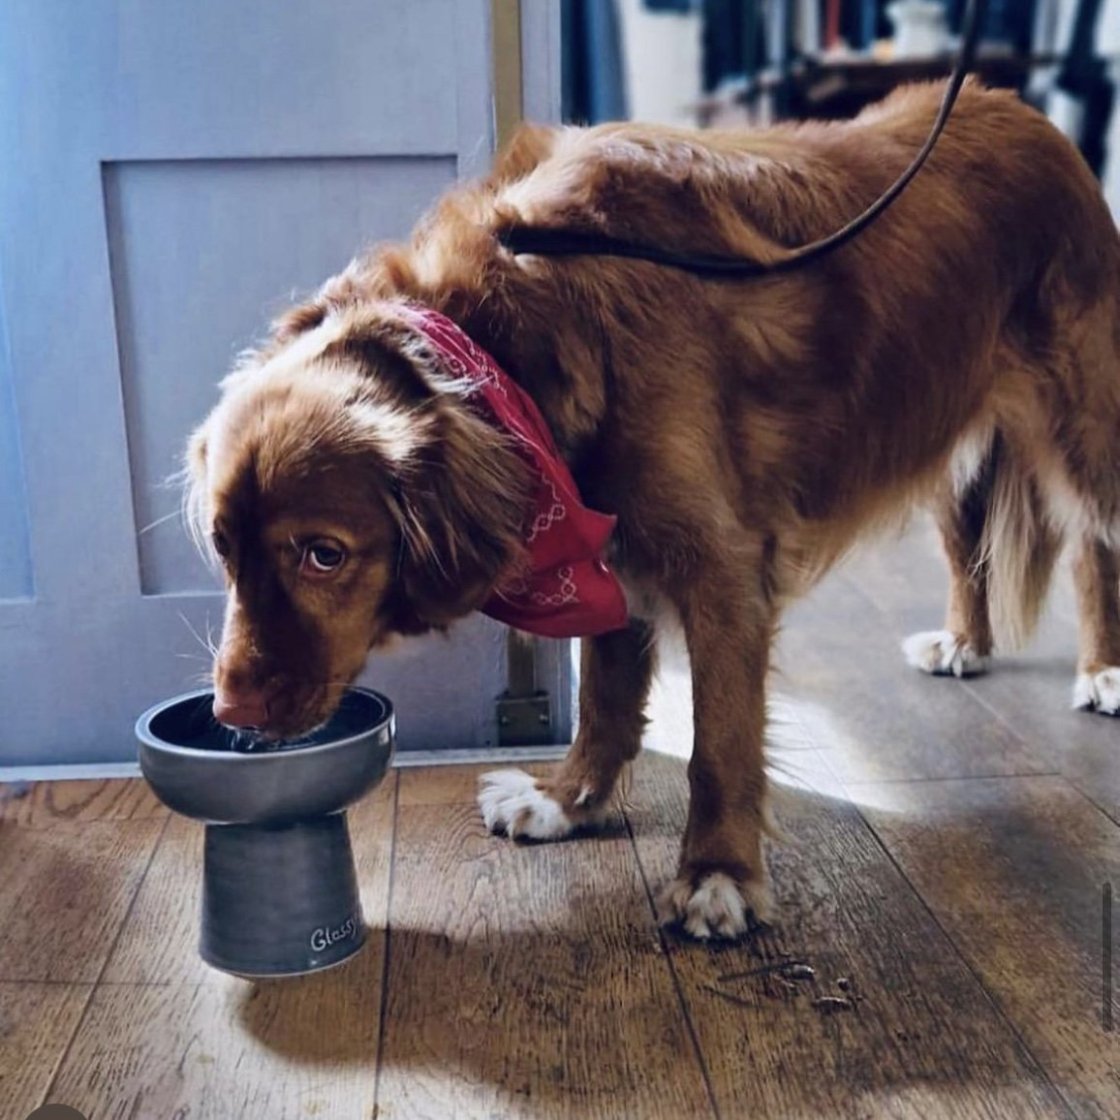 Classy Bowldeepfor drinking water and for dog...